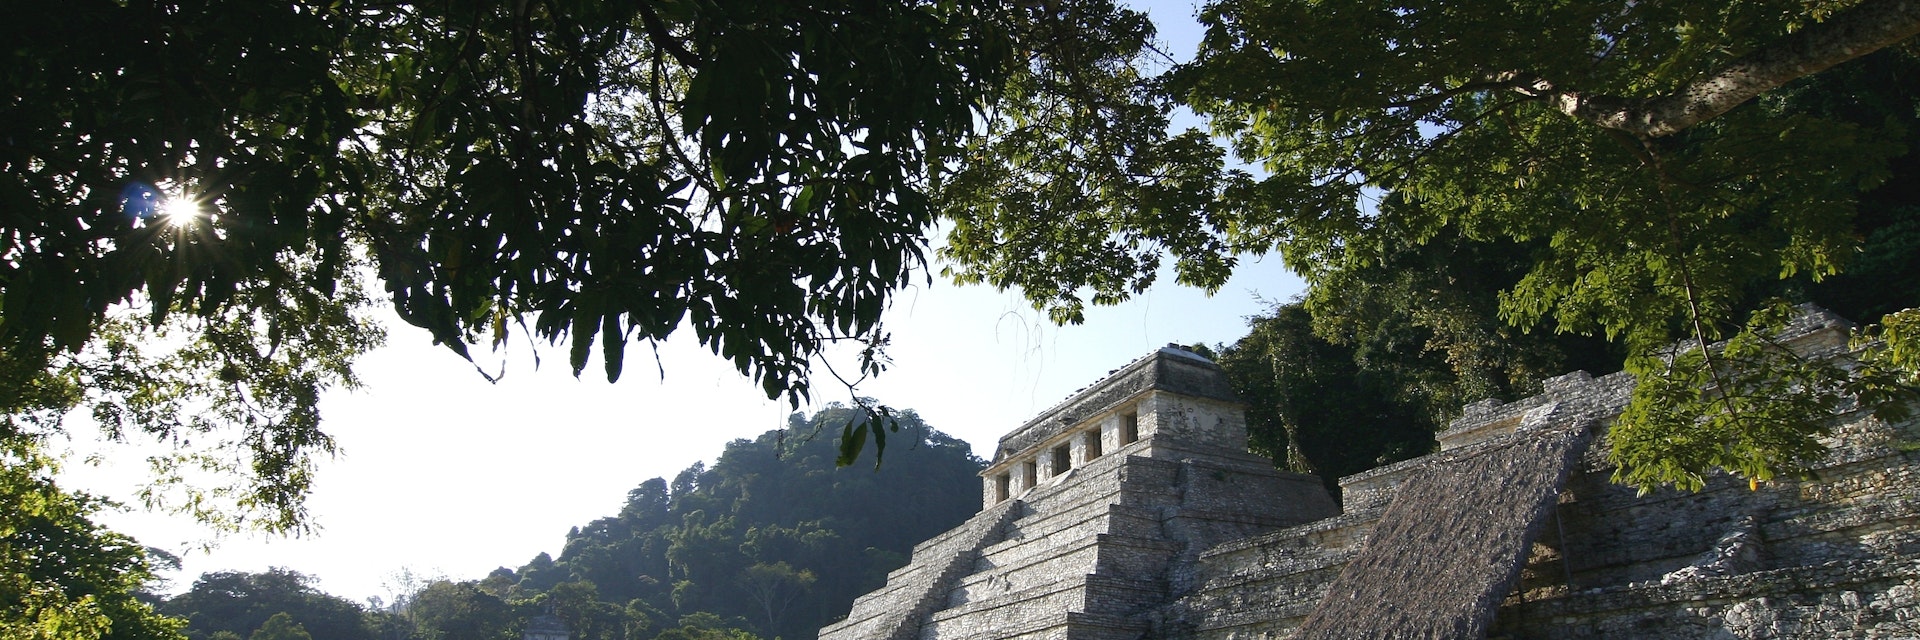 Temple of the Inscriptions. Ruins of the ancient Mayan city of Palenque, in the jungles of Chiapas, Mexico; Shutterstock ID 38923966; Your name (First / Last): Josh Vogel; Project no. or GL code: 56530; Network activity no. or Cost Centre: Online-Design; Product or Project: 65050/7529/Josh Vogel/LP.com Destination Galleries